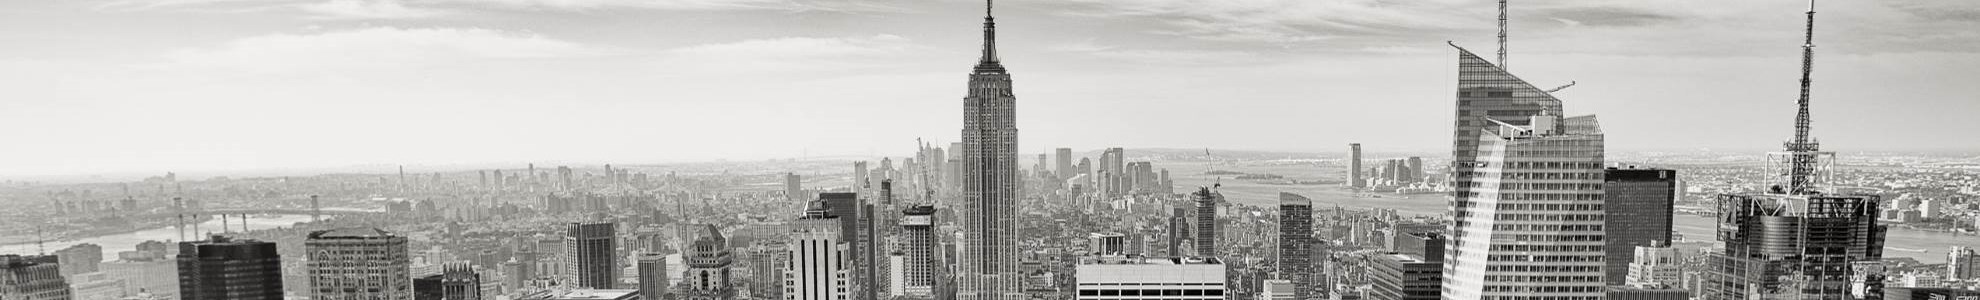 A panoramic view of the new york skyline and the empire state building